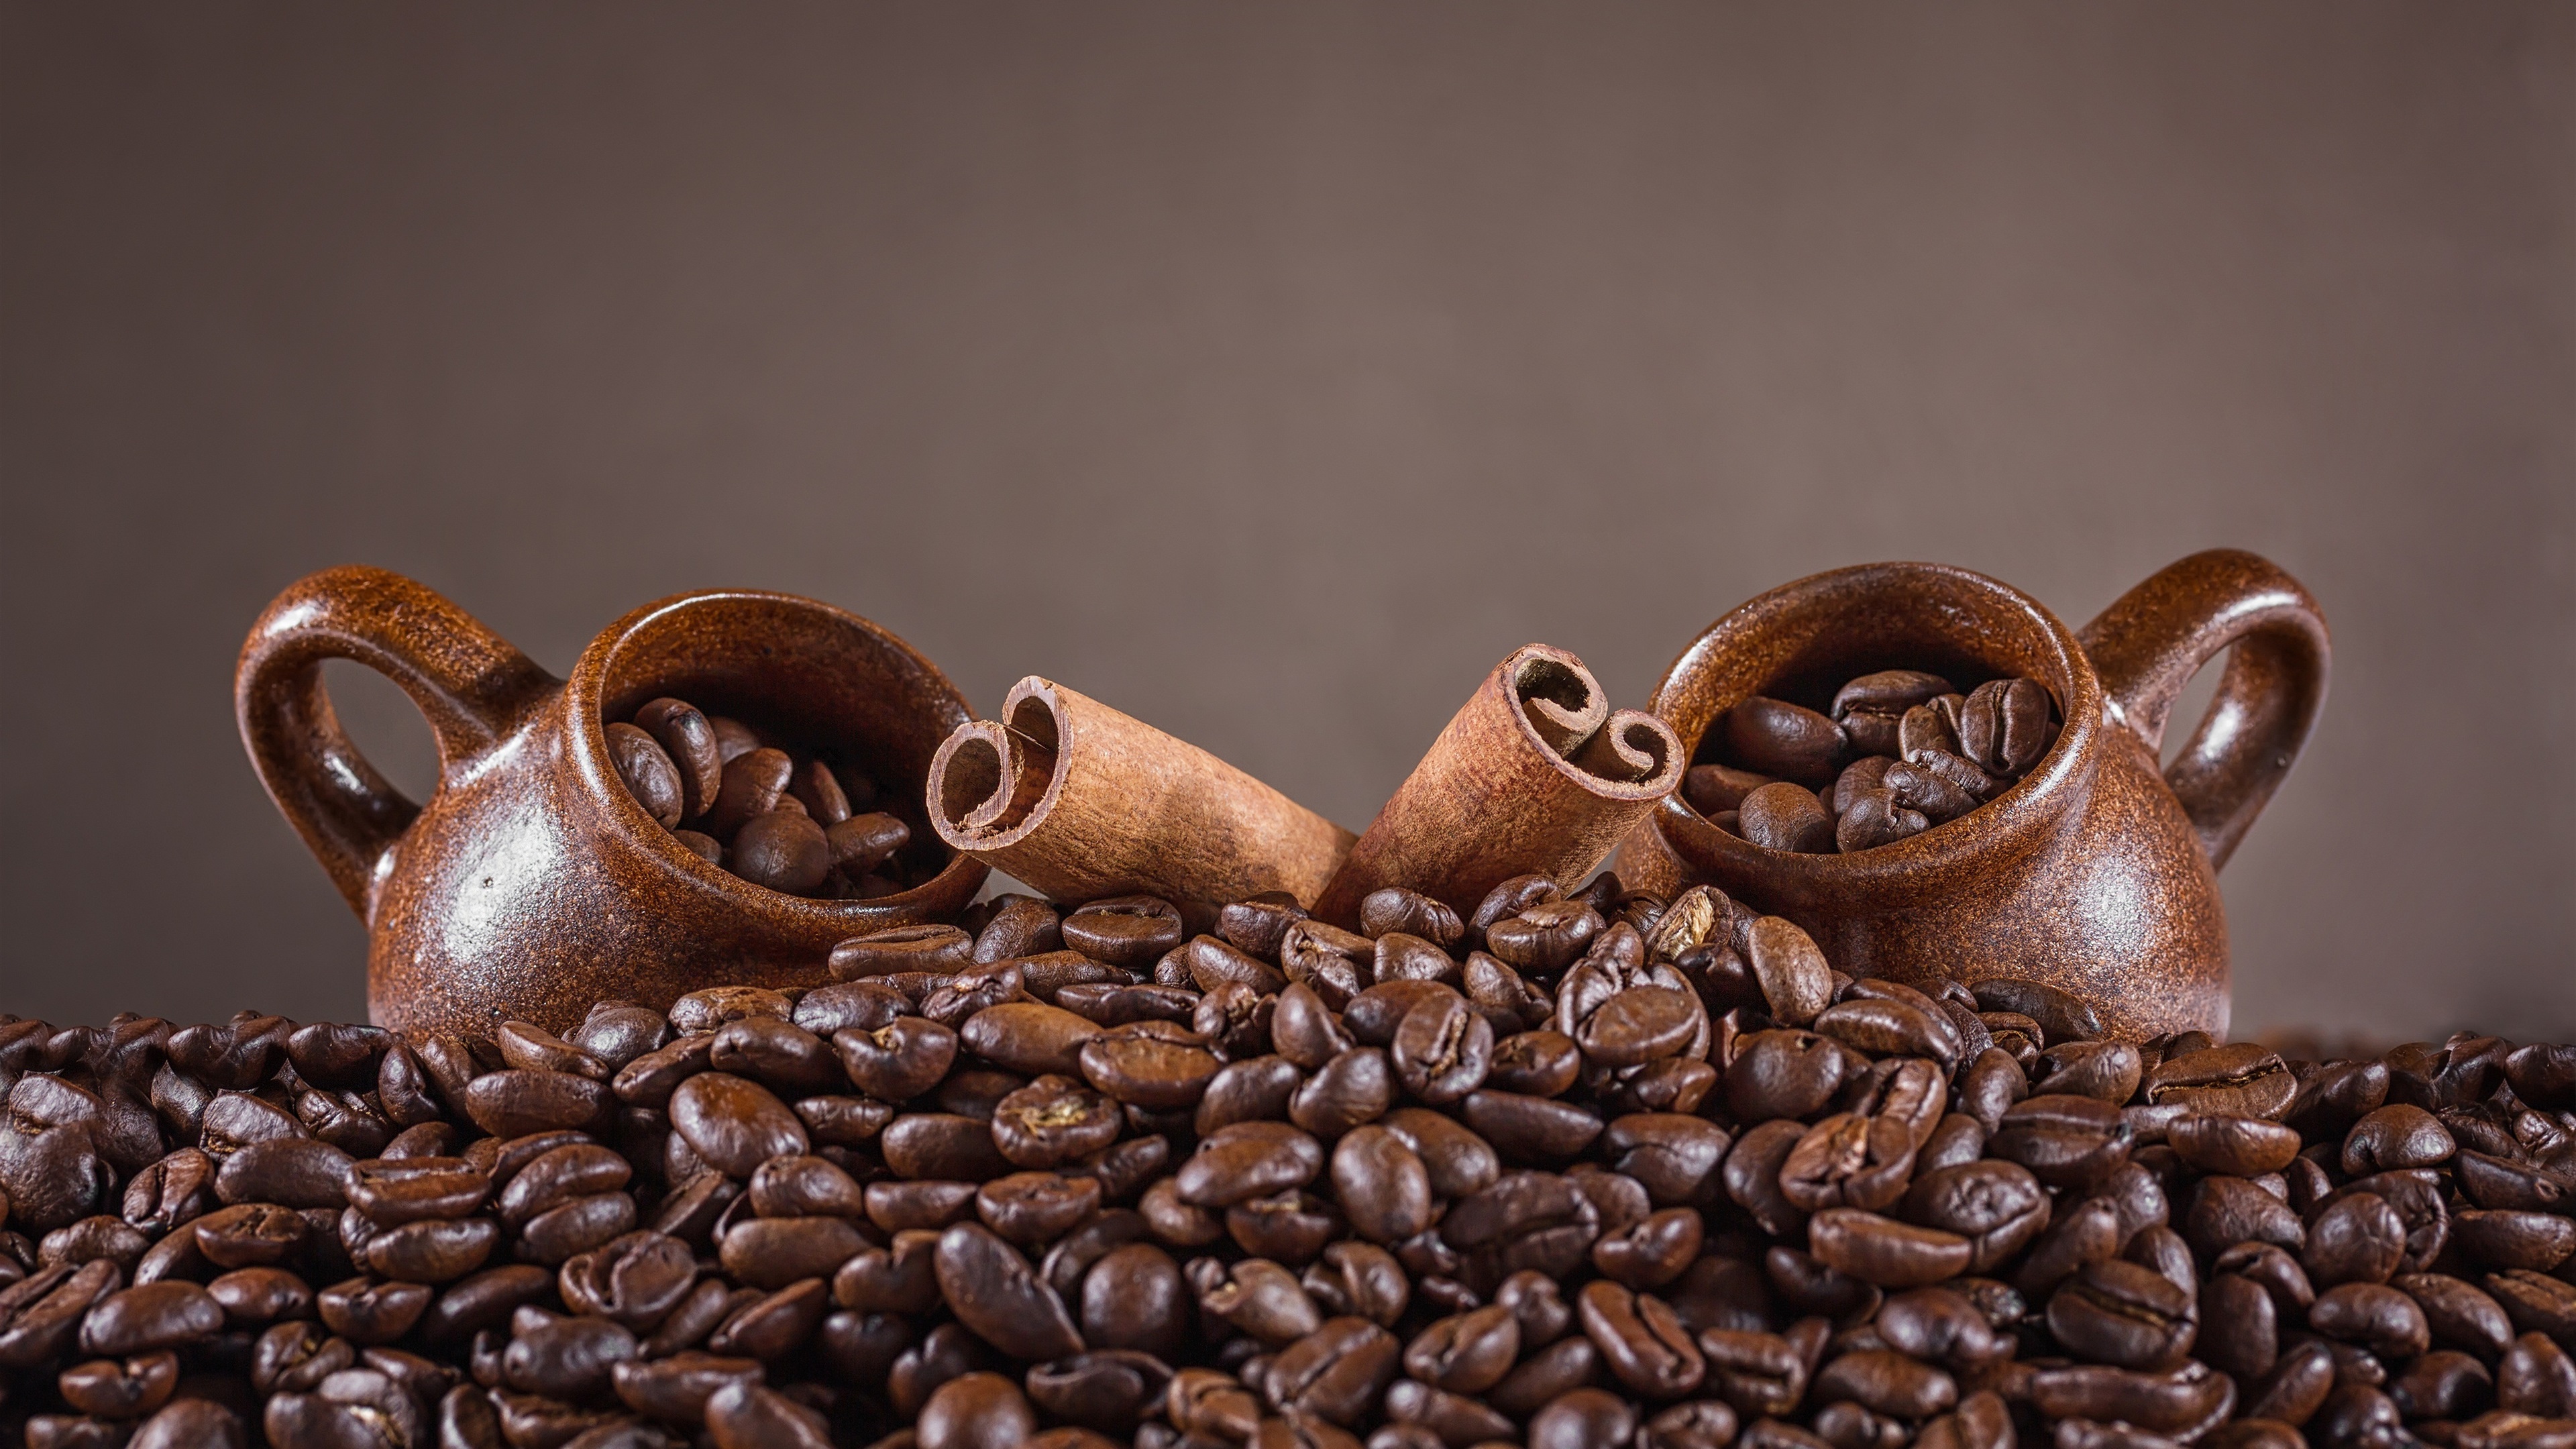 Download wallpaper for 800x600 resolution | Coffee beans, cups, cinnamon |  other | Wallpaper Better